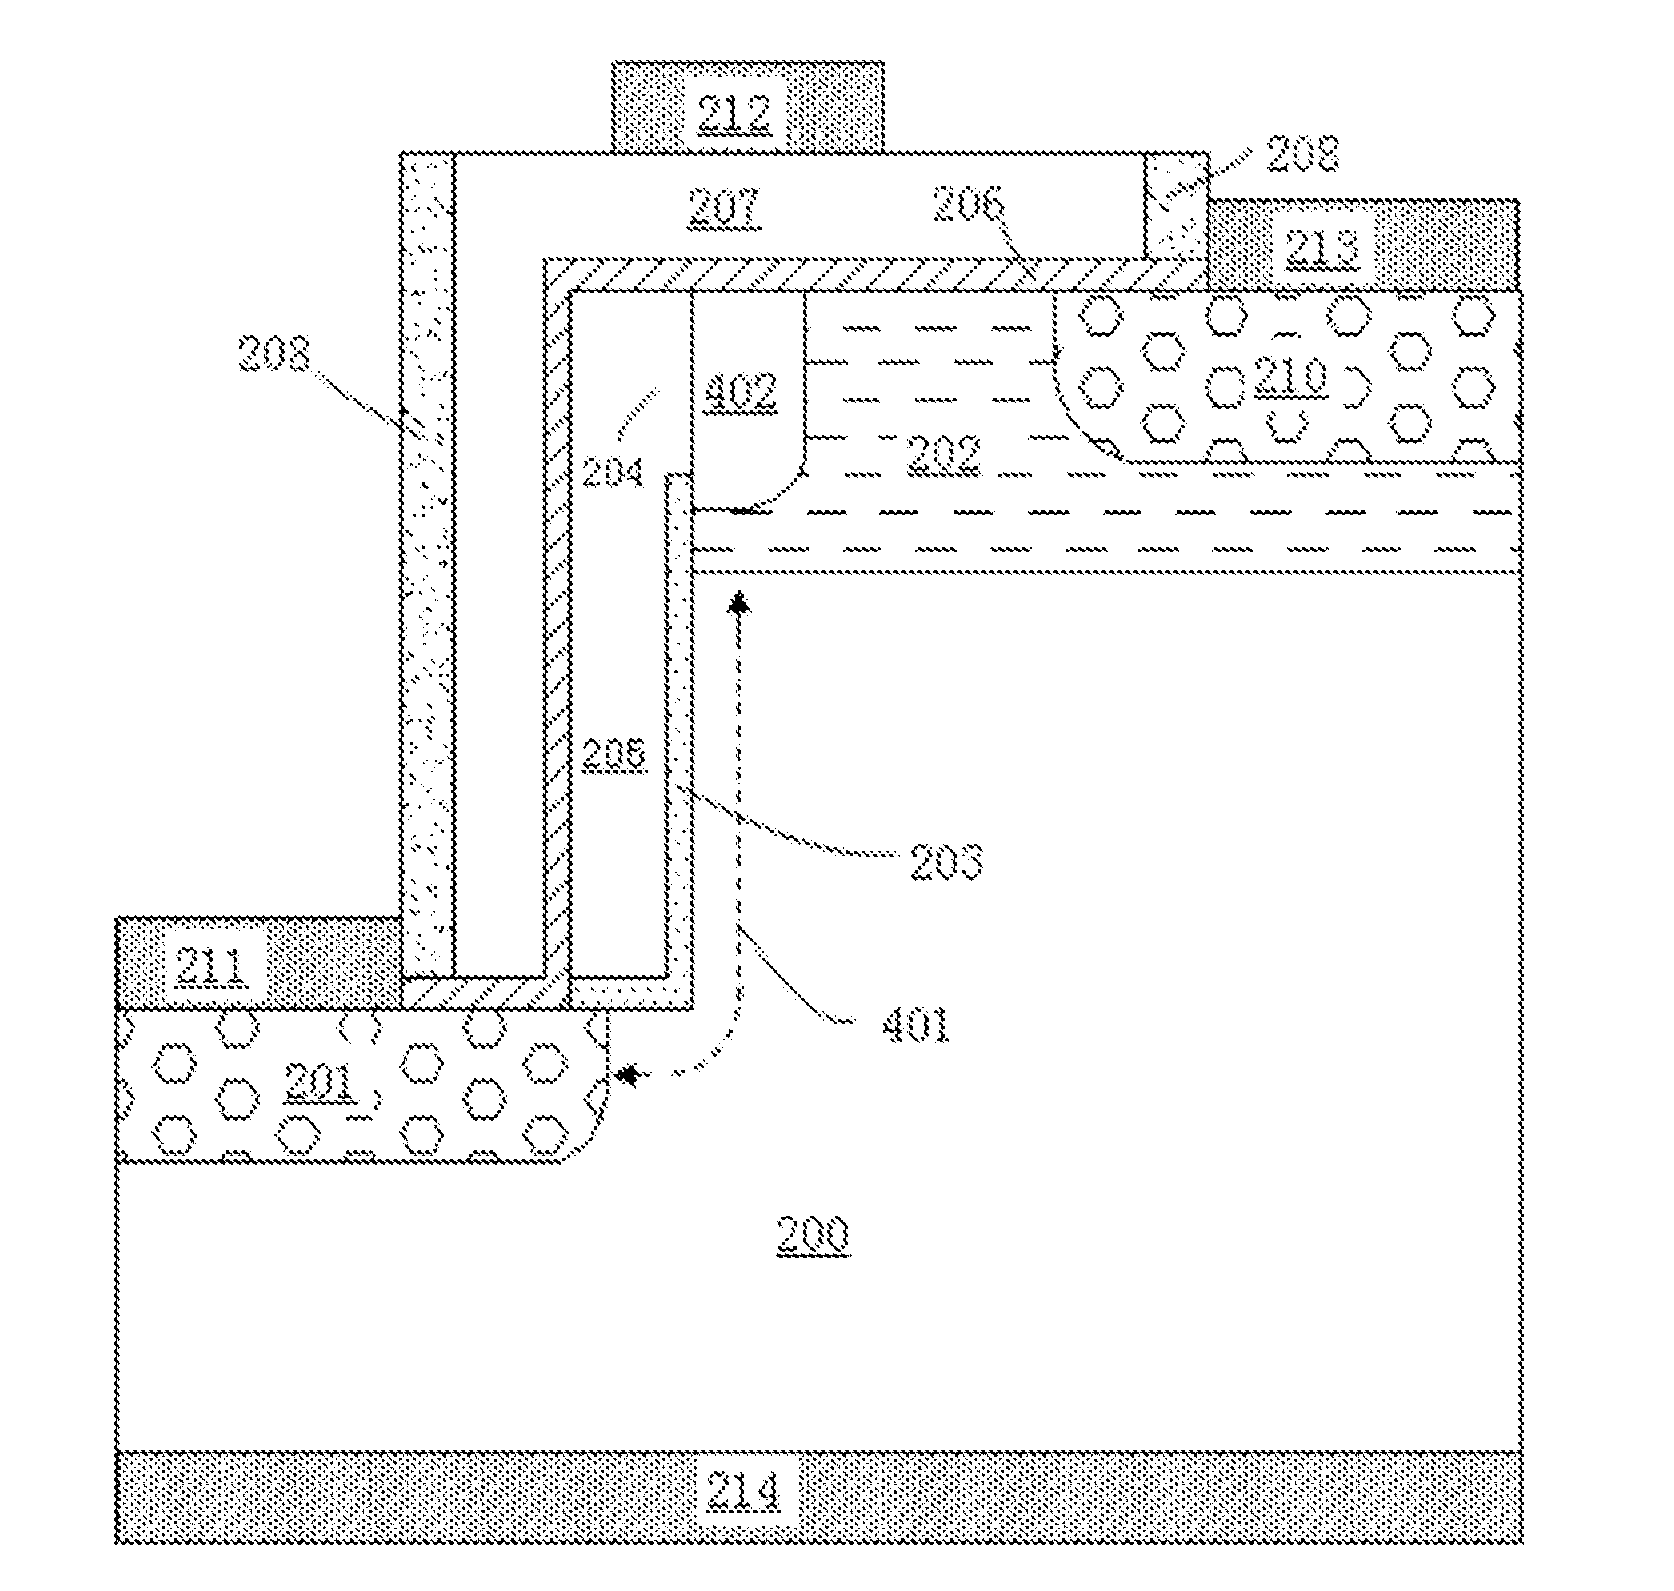 Semi-floating-gate device and its manufacturing method